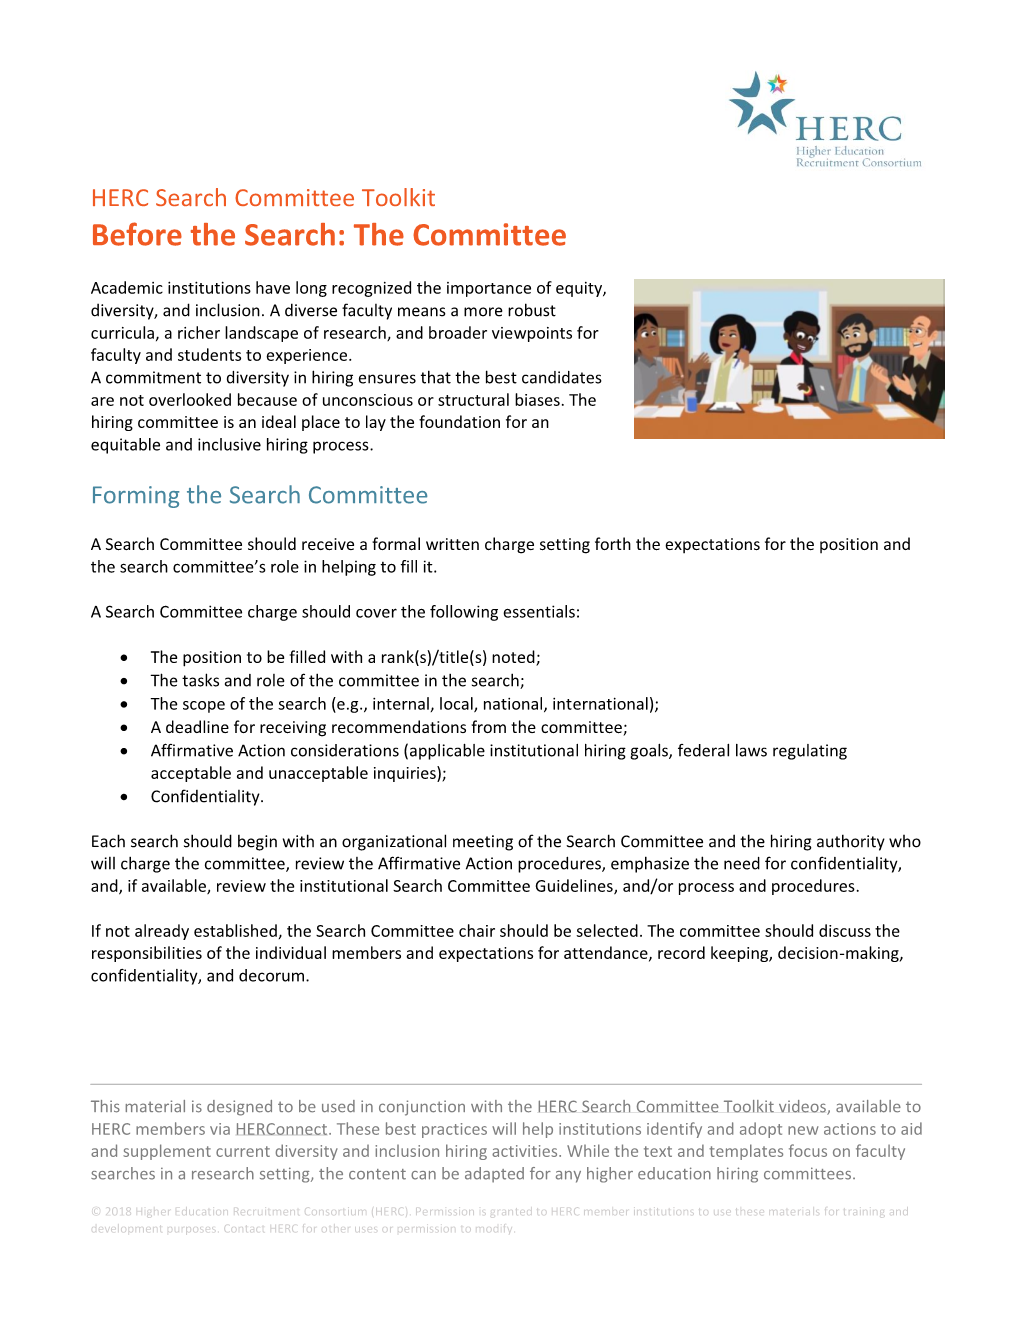 HERC Search Committee Toolkit Before the Search: the Committee